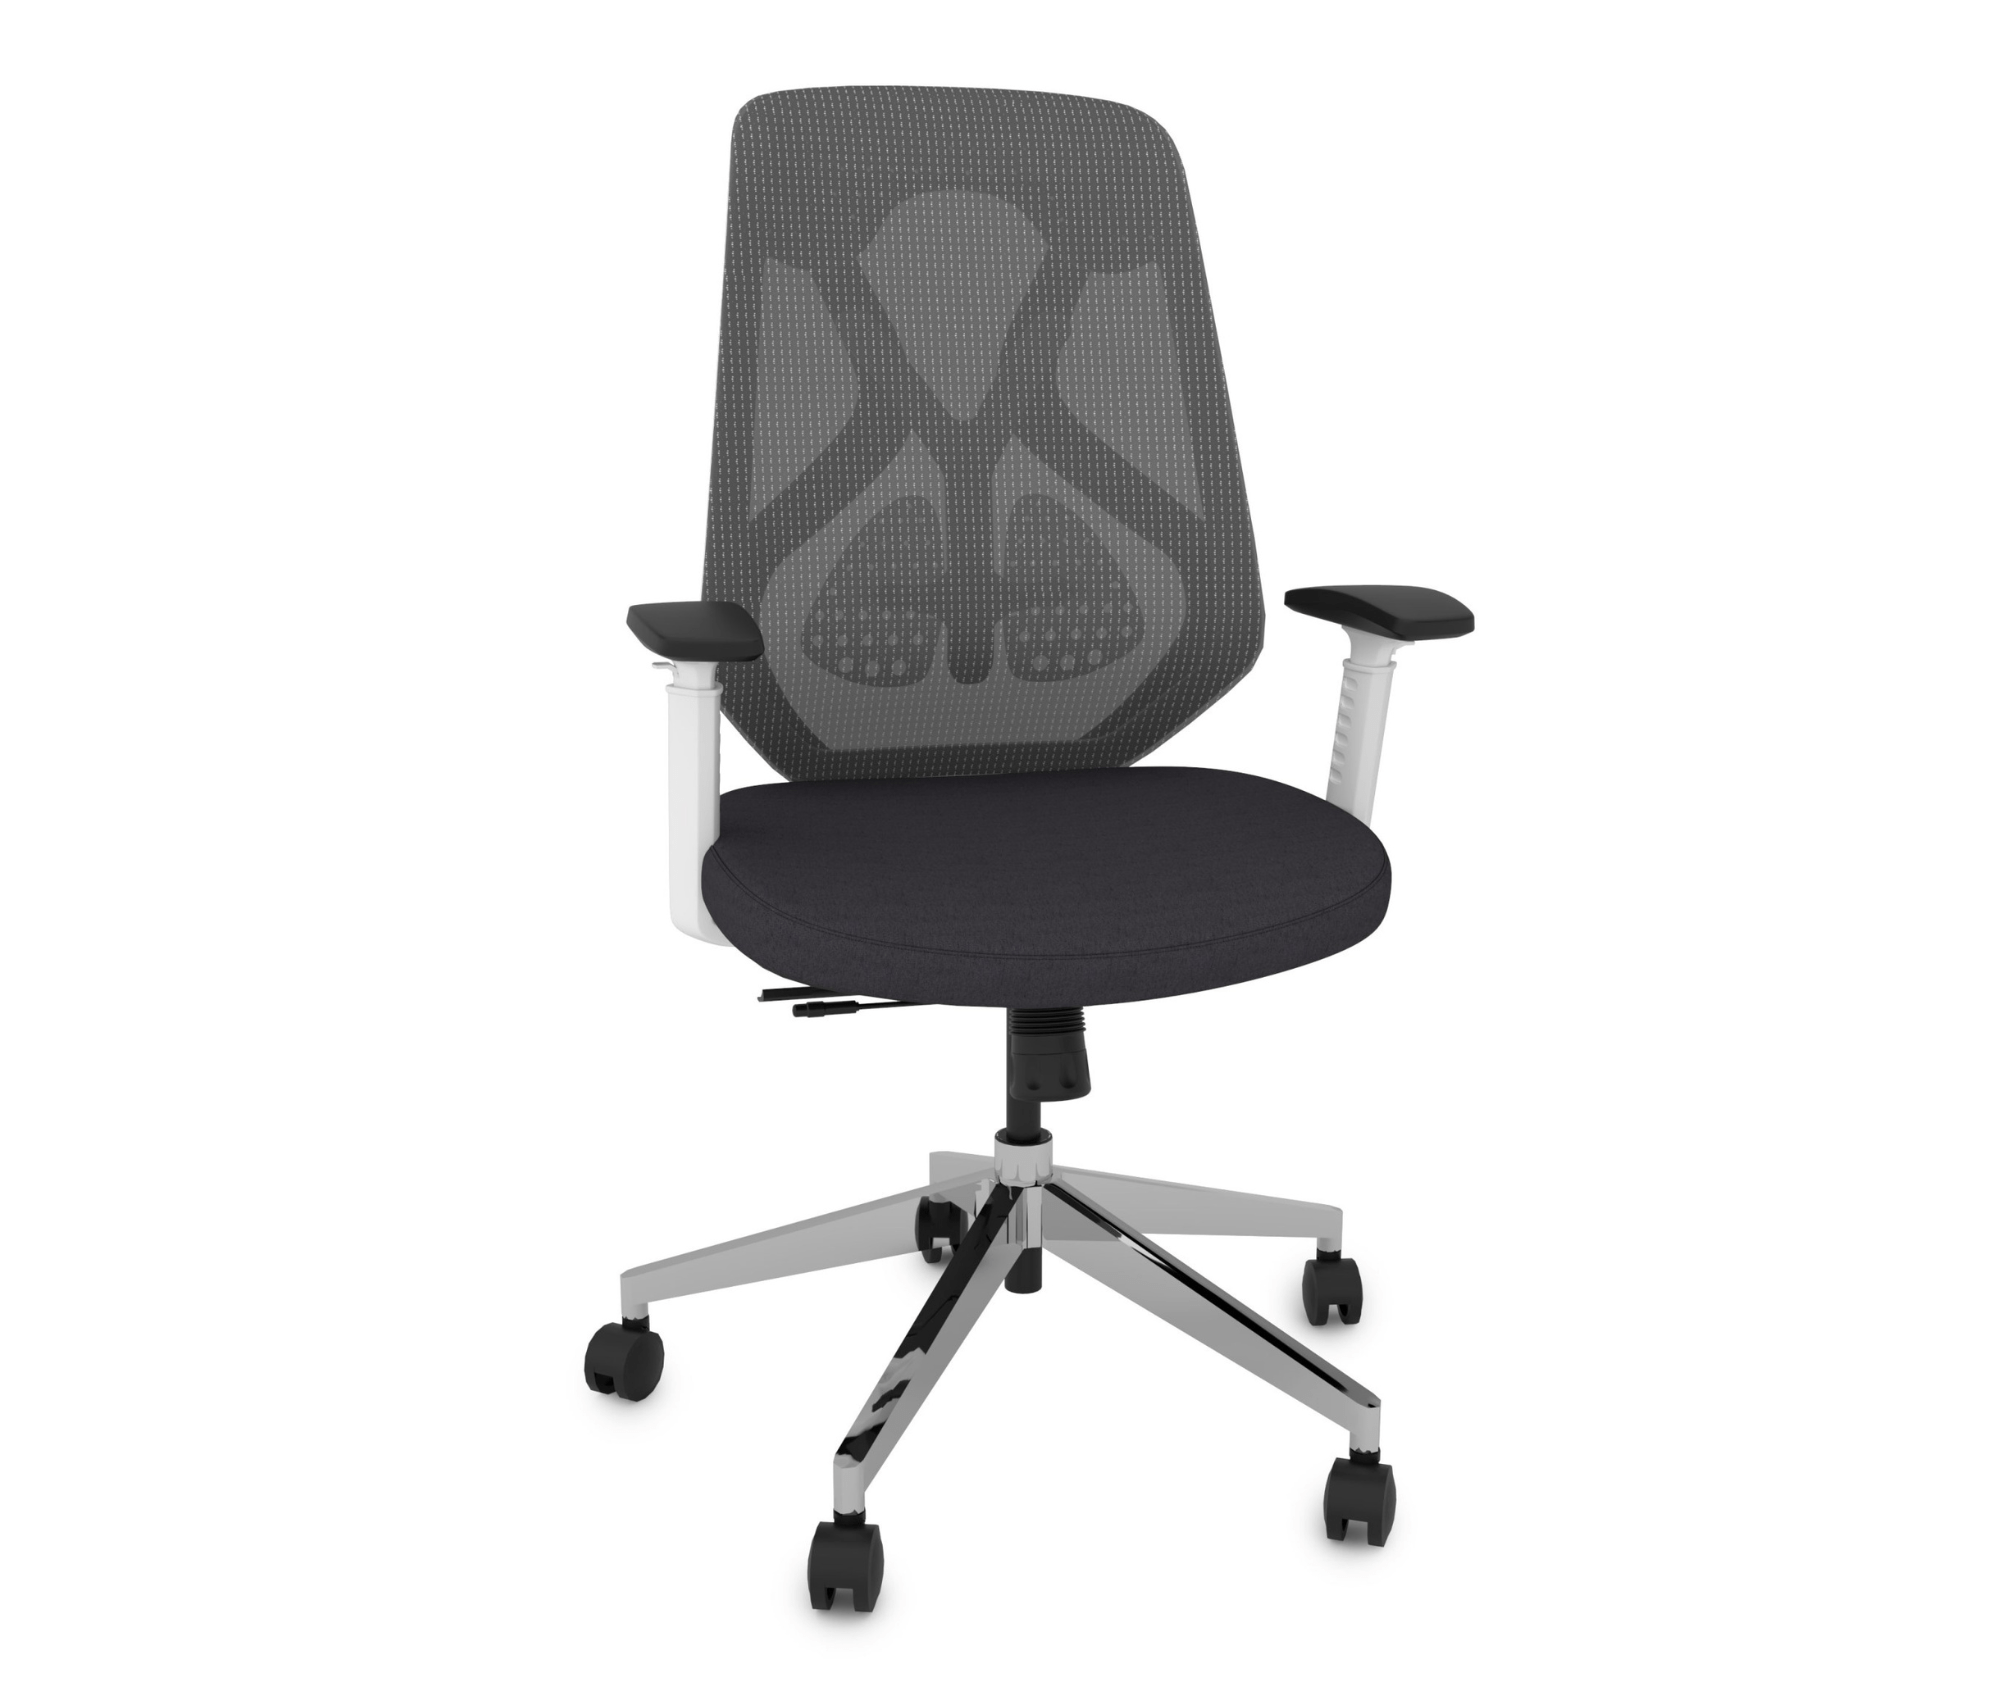 Ergonomic Plus Chair | Posture-Correcting Office Chair Porvata Office Chairs Smoke